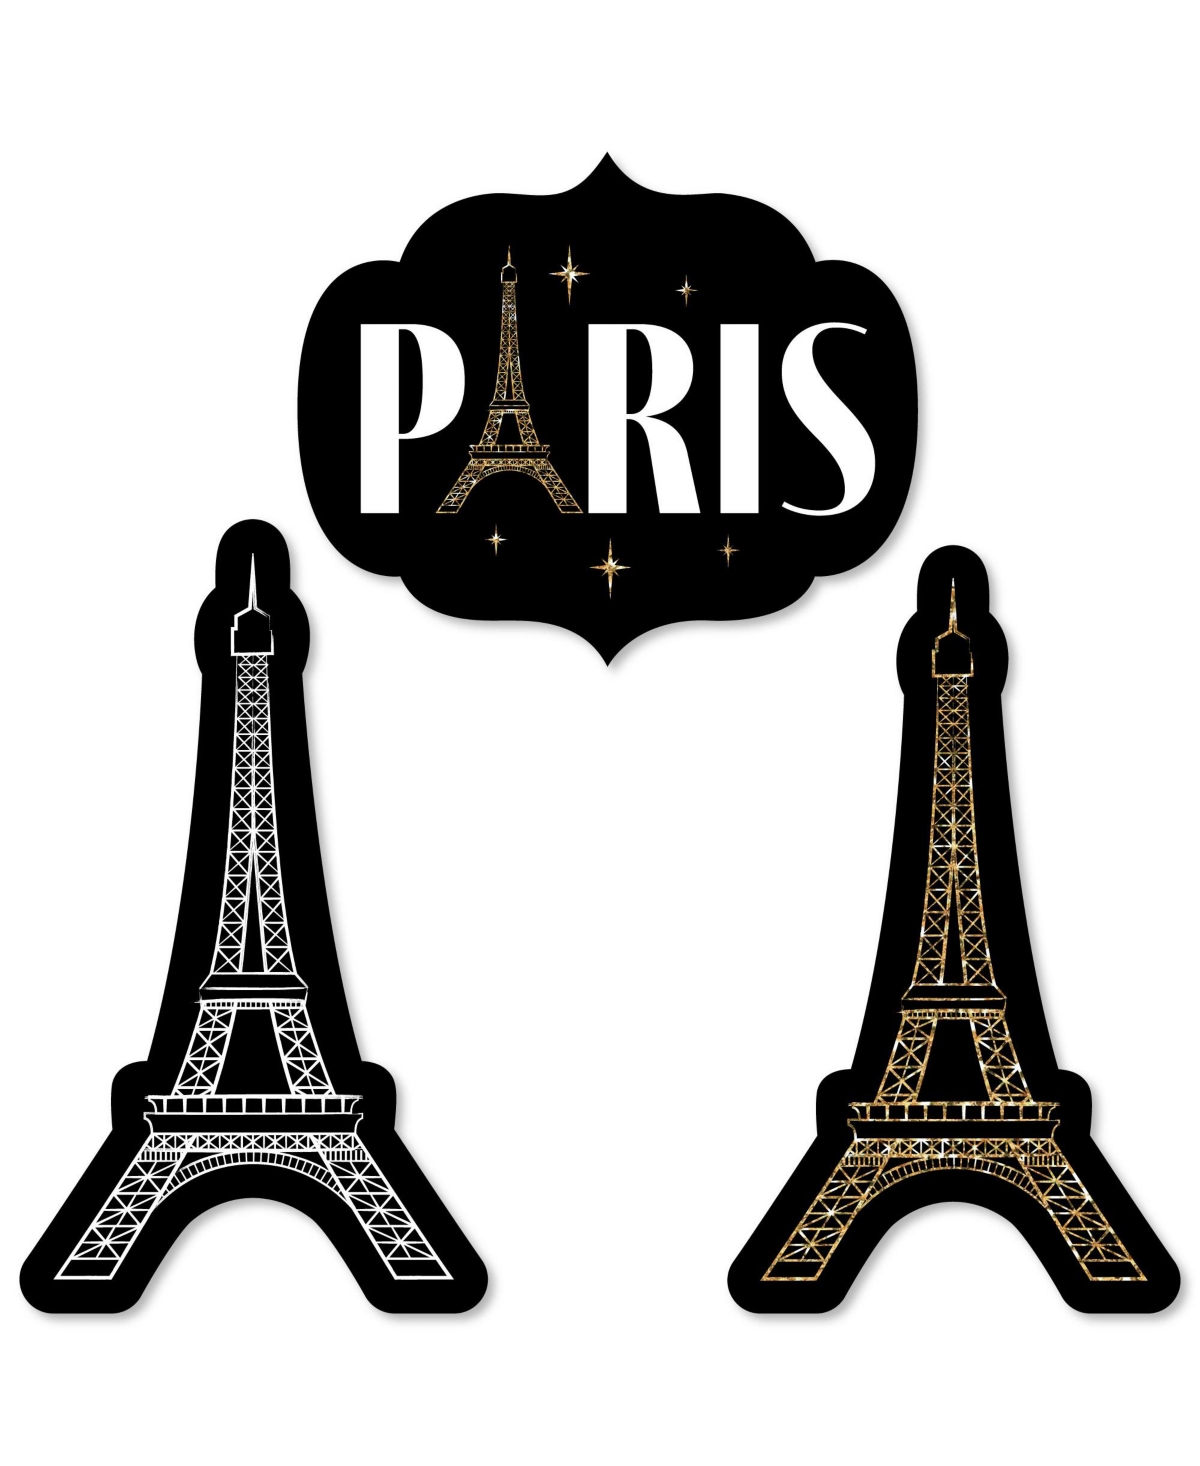 Stars Over Paris - Diy Shaped Parisian Themed Party Cut-Outs - 24 Count